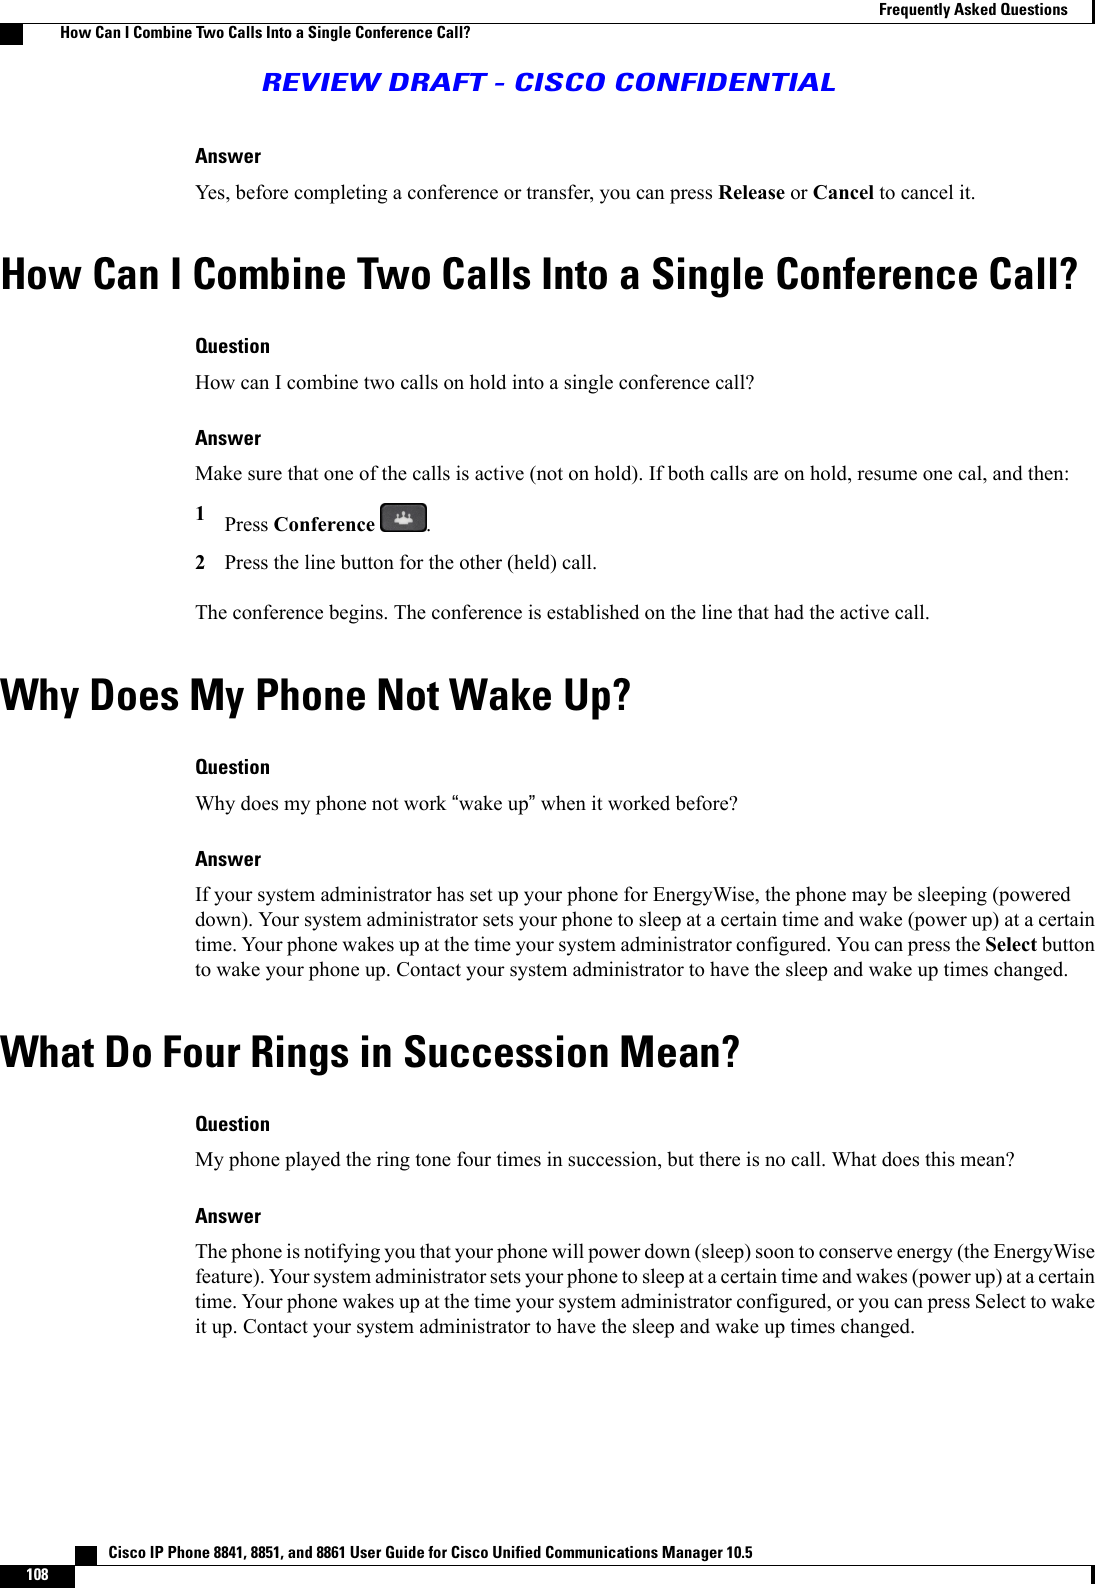 AnswerYes, before completing a conference or transfer, you can press Release or Cancel to cancel it.How Can I Combine Two Calls Into a Single Conference Call?QuestionHow can I combine two calls on hold into a single conference call?AnswerMake sure that one of the calls is active (not on hold). If both calls are on hold, resume one cal, and then:1Press Conference .2Press the line button for the other (held) call.The conference begins. The conference is established on the line that had the active call.Why Does My Phone Not Wake Up?QuestionWhy does my phone not work “wake up”when it worked before?AnswerIf your system administrator has set up your phone for EnergyWise, the phone may be sleeping (powereddown). Your system administrator sets your phone to sleep at a certain time and wake (power up) at a certaintime. Your phone wakes up at the time your system administrator configured. You can press the Select buttonto wake your phone up. Contact your system administrator to have the sleep and wake up times changed.What Do Four Rings in Succession Mean?QuestionMy phone played the ring tone four times in succession, but there is no call. What does this mean?AnswerThe phone is notifying you that your phone will power down (sleep) soon to conserve energy (the EnergyWisefeature). Your system administrator sets your phone to sleep at a certain time and wakes (power up) at a certaintime. Your phone wakes up at the time your system administrator configured, or you can press Select to wakeit up. Contact your system administrator to have the sleep and wake up times changed.   Cisco IP Phone 8841, 8851, and 8861 User Guide for Cisco Unified Communications Manager 10.5108Frequently Asked QuestionsHow Can I Combine Two Calls Into a Single Conference Call?REVIEW DRAFT - CISCO CONFIDENTIAL